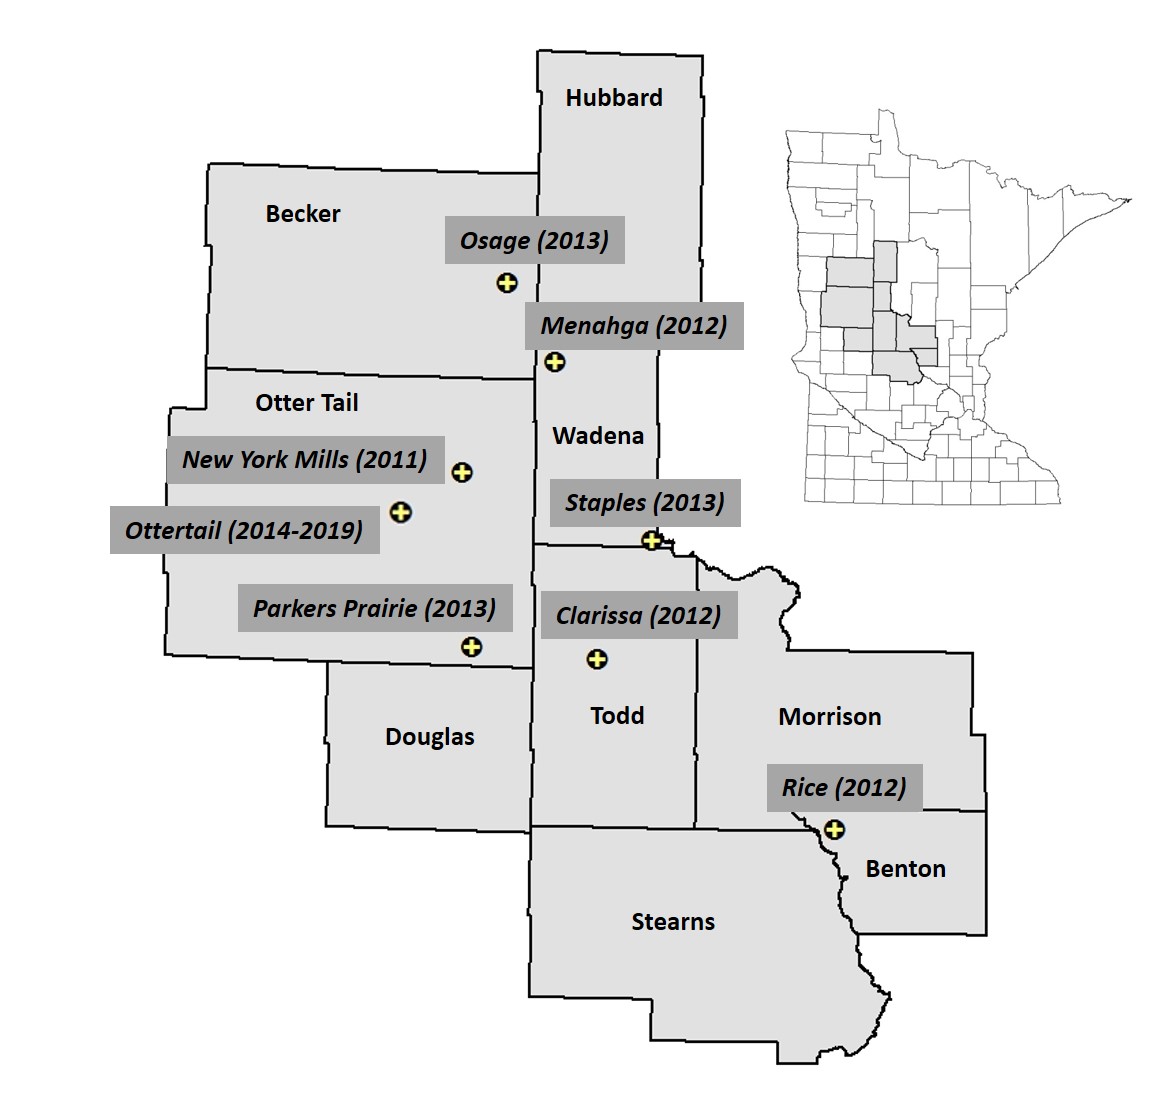 Map of Minnesota showing the location of 12 irrigation workshops from 2011-2019.